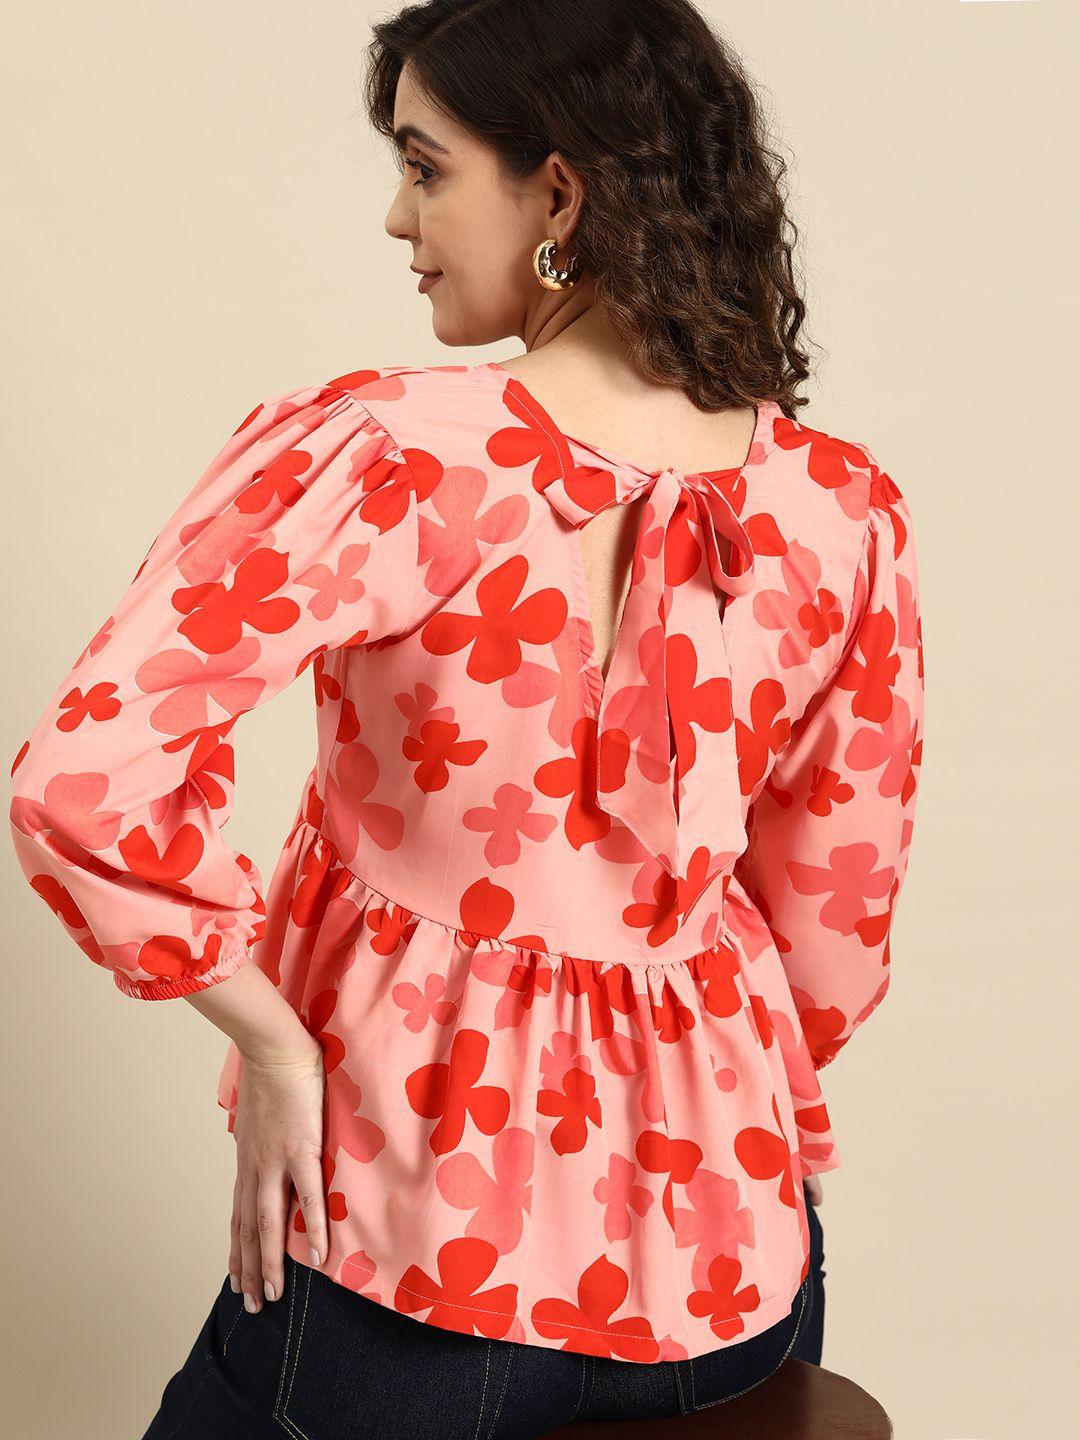 all about you floral print crepe peplum top